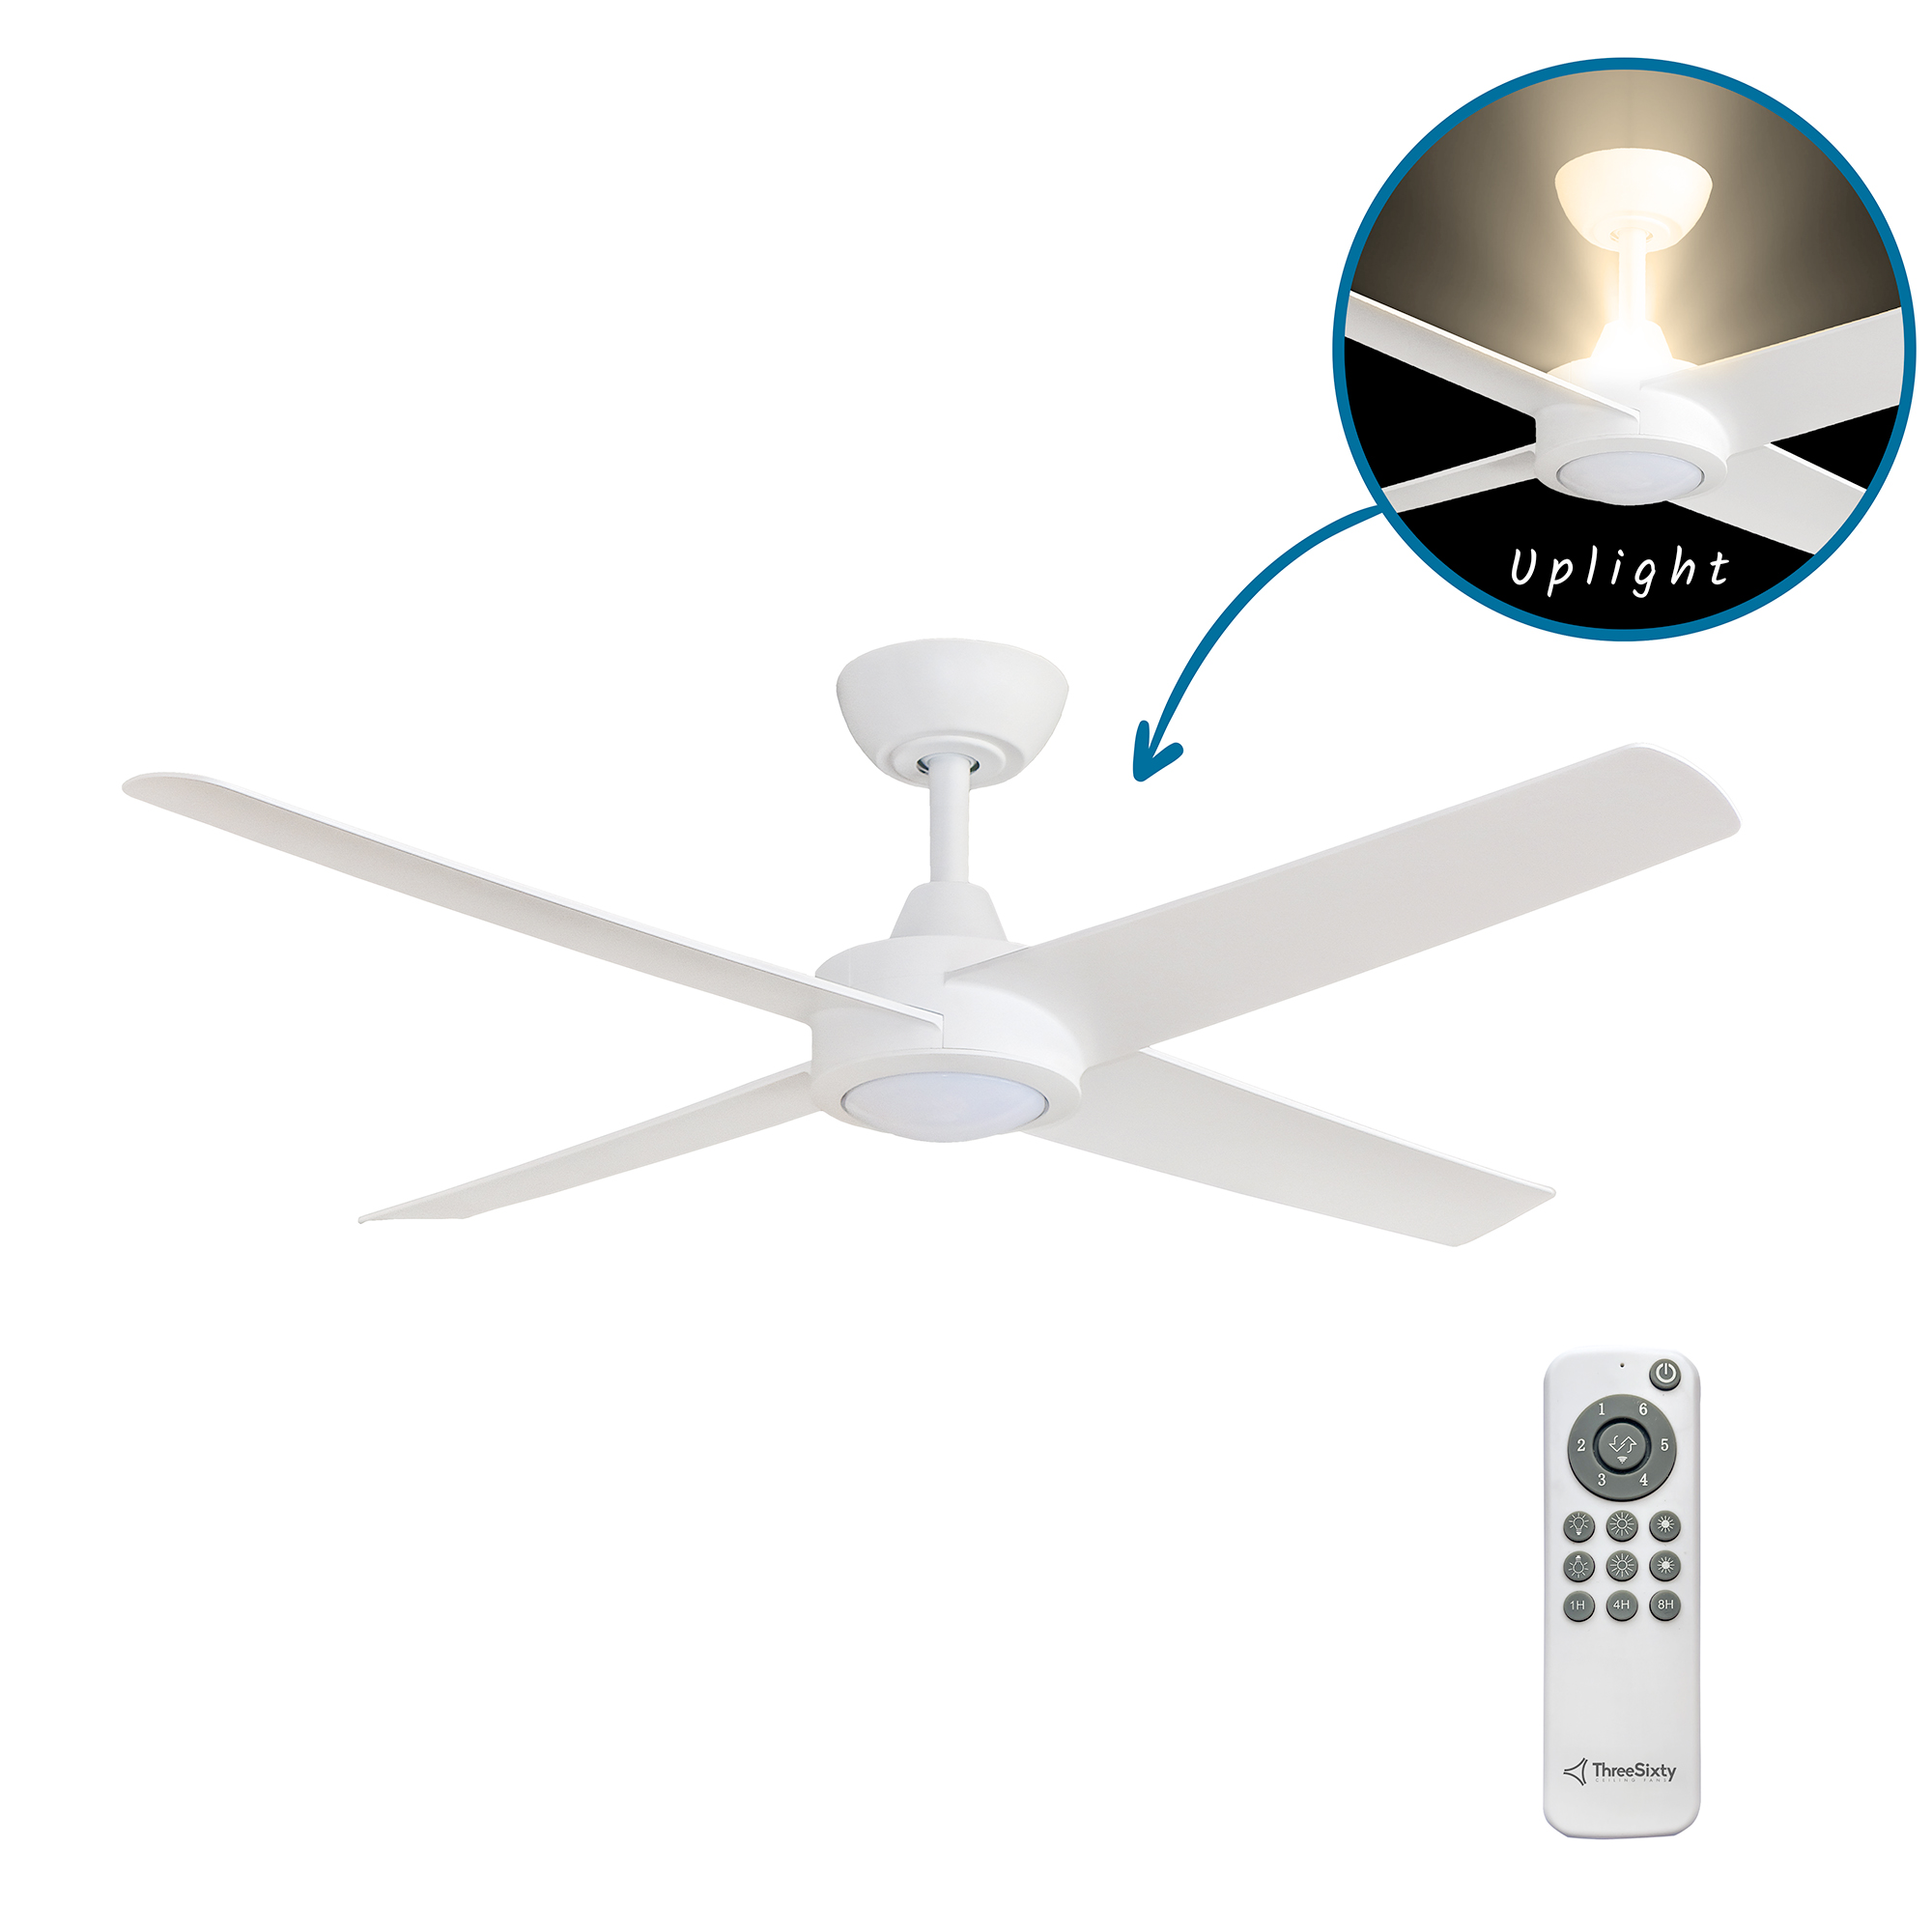 48" Ambience DC Ceiling Fan in White with Built-in Uplight